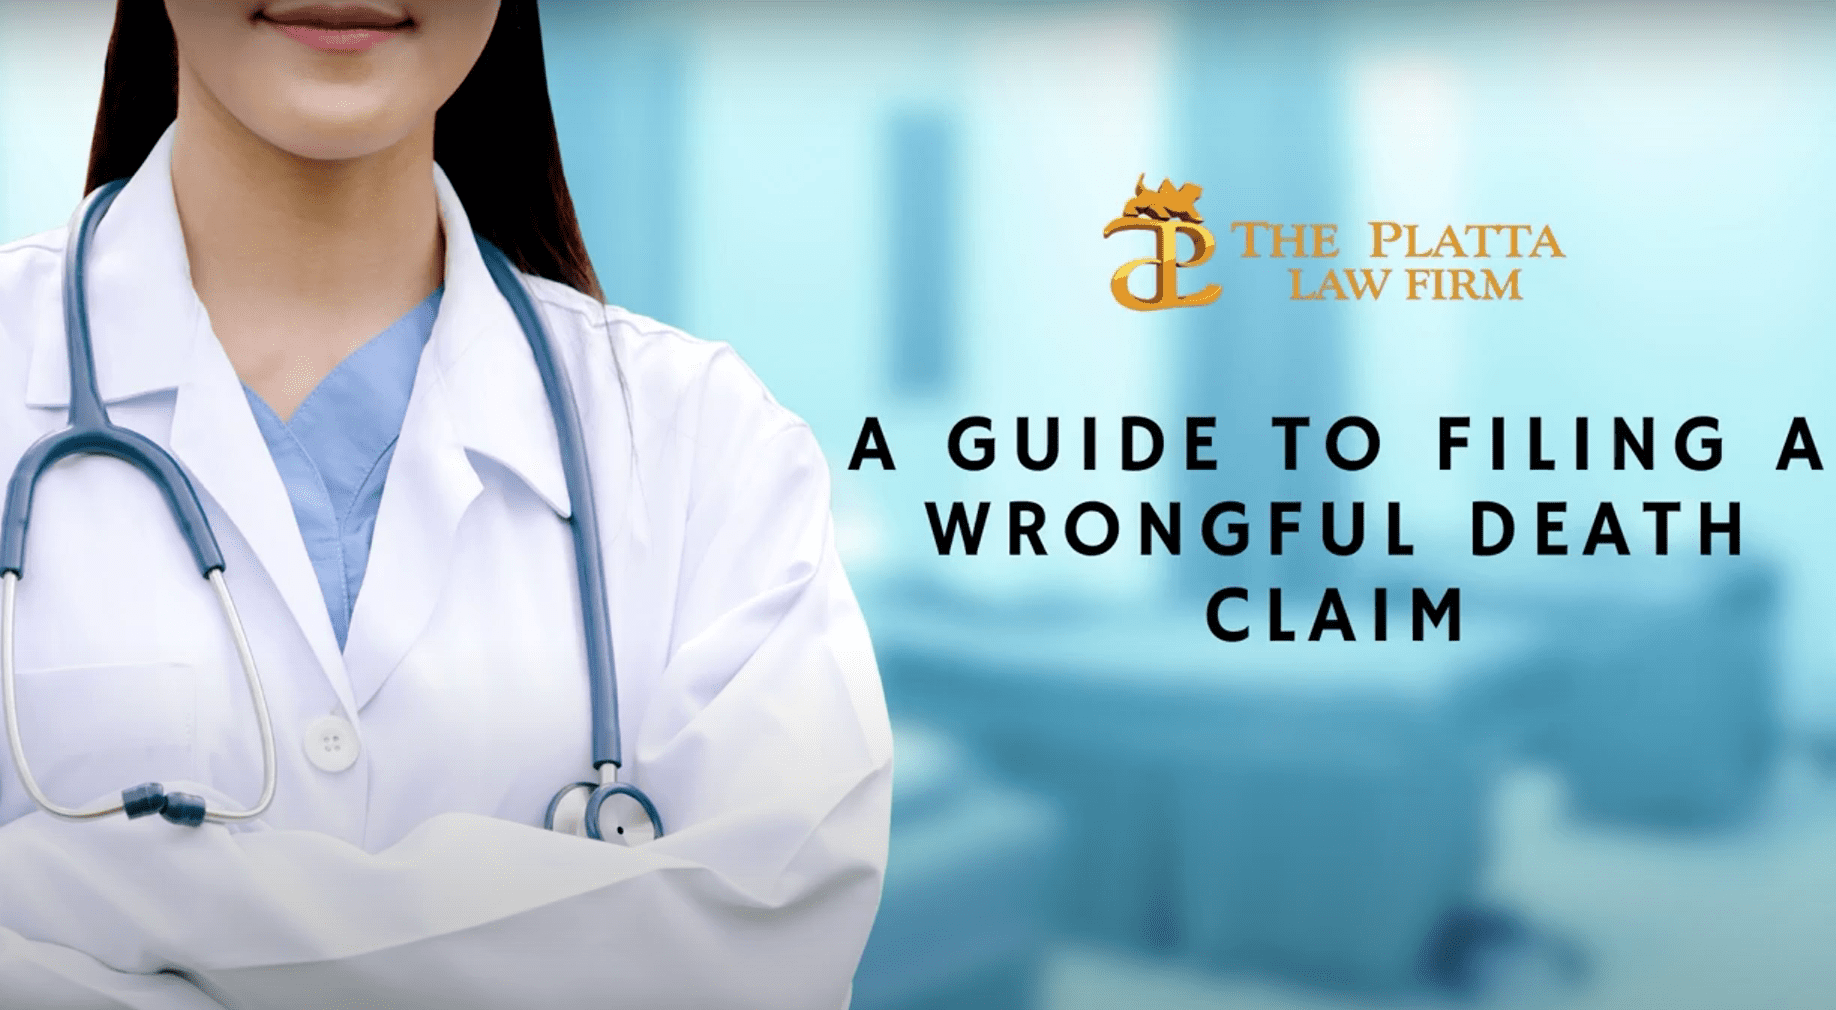 A GUIDE TO FILING A WRONGFUL DEATH CLAIM